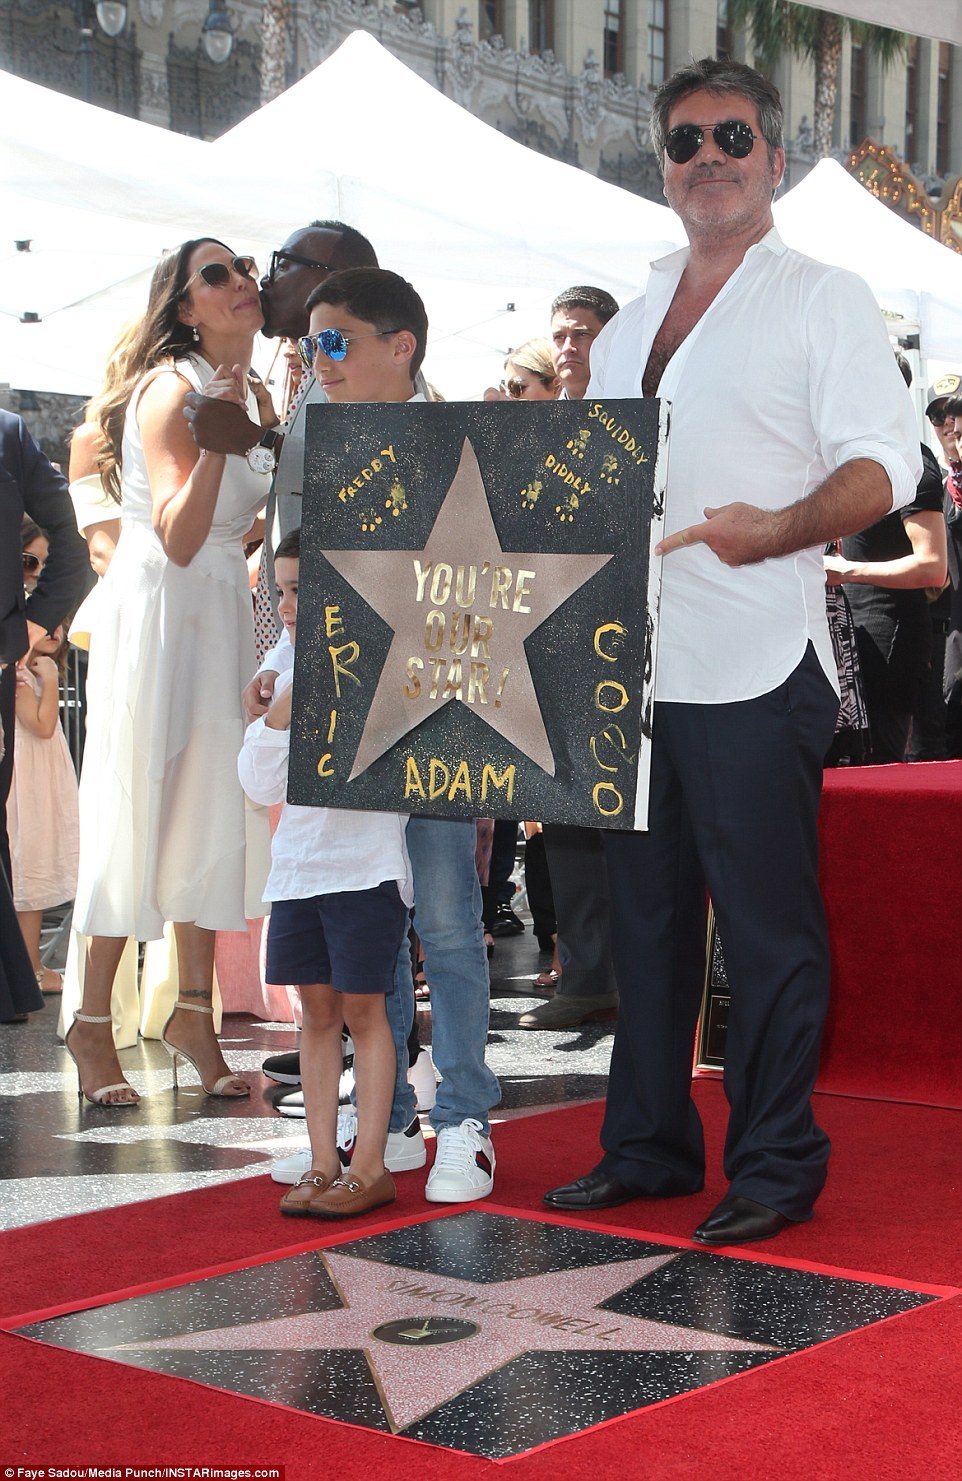 Simon Cowell has gotten his star on the Hollywood Walk of Fame 